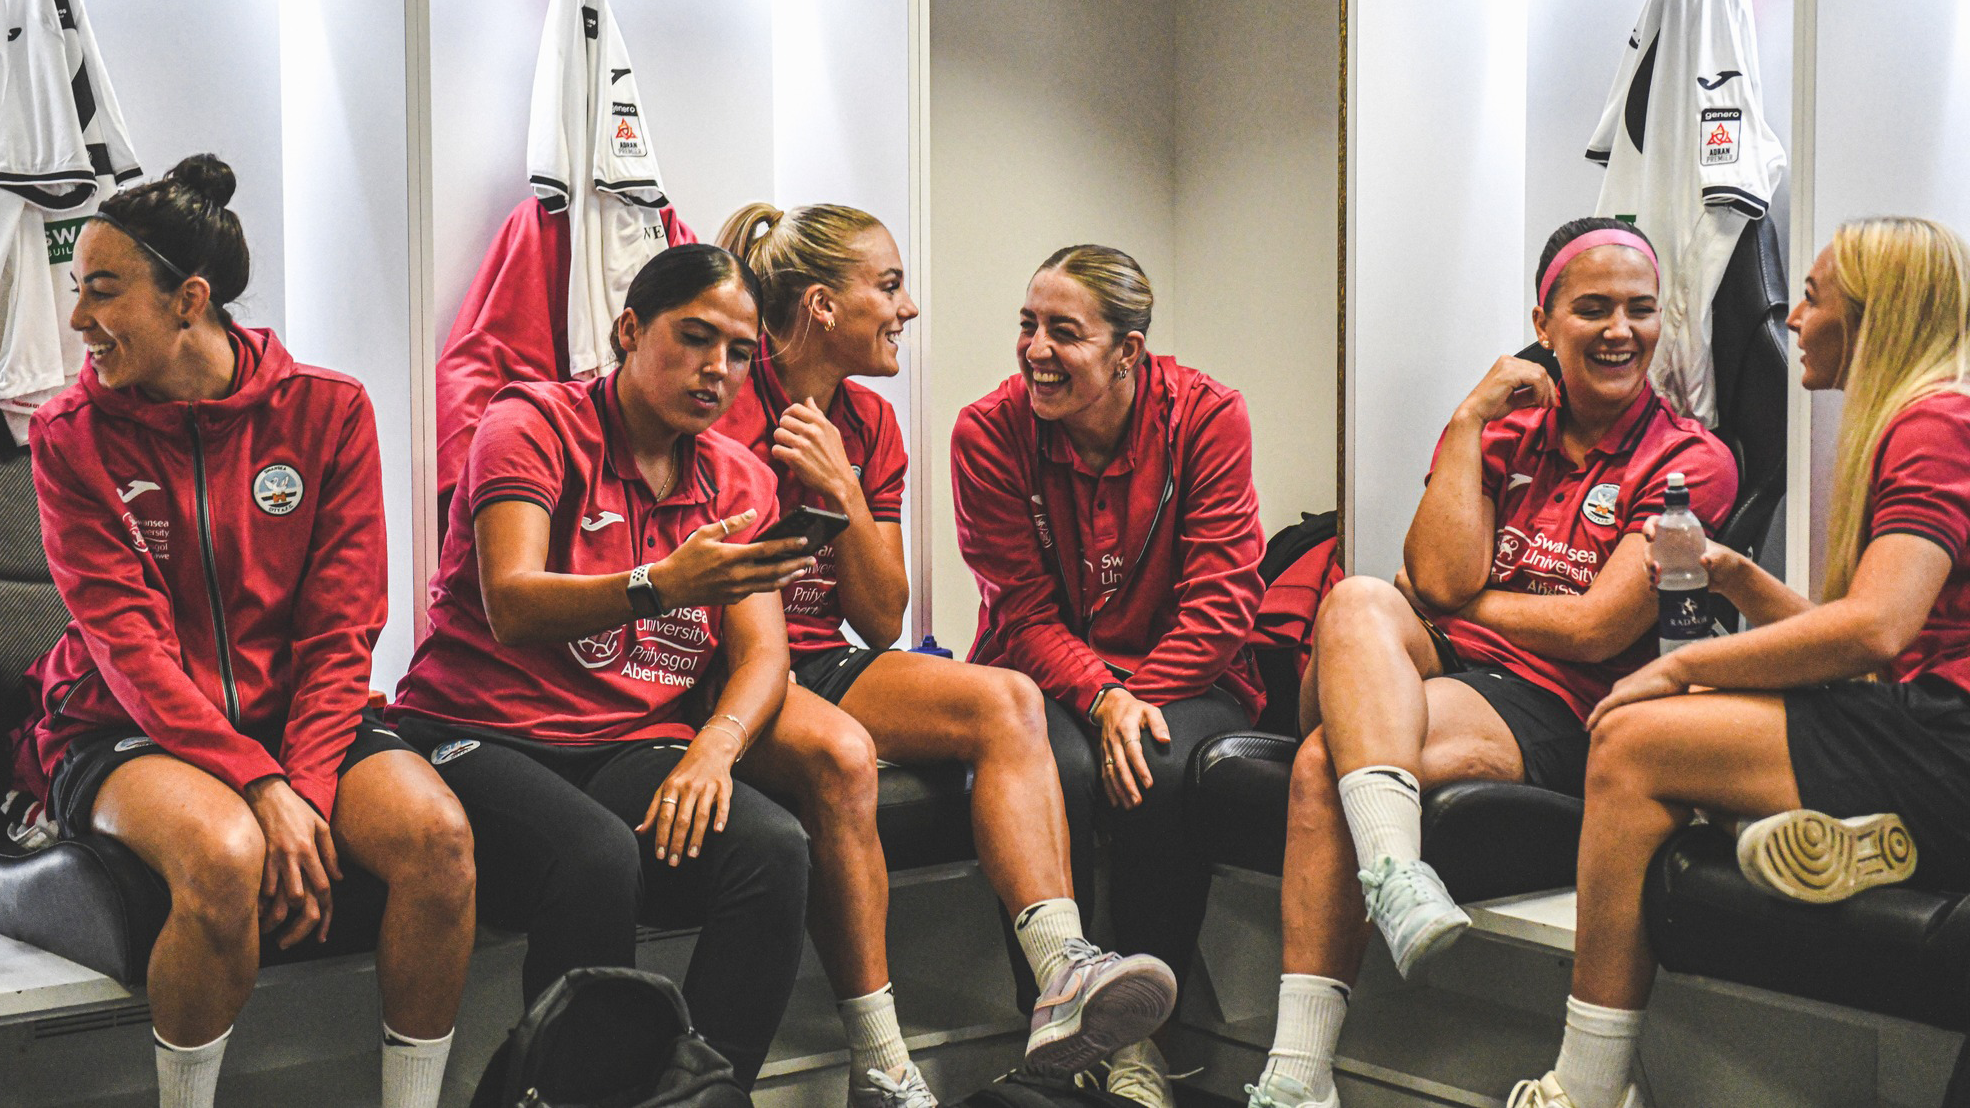 Jess Williams, Ellie Lake, Emma Beynon, Lucy Finch and Kelly Adams laughing in the Swansea.com changing rooms